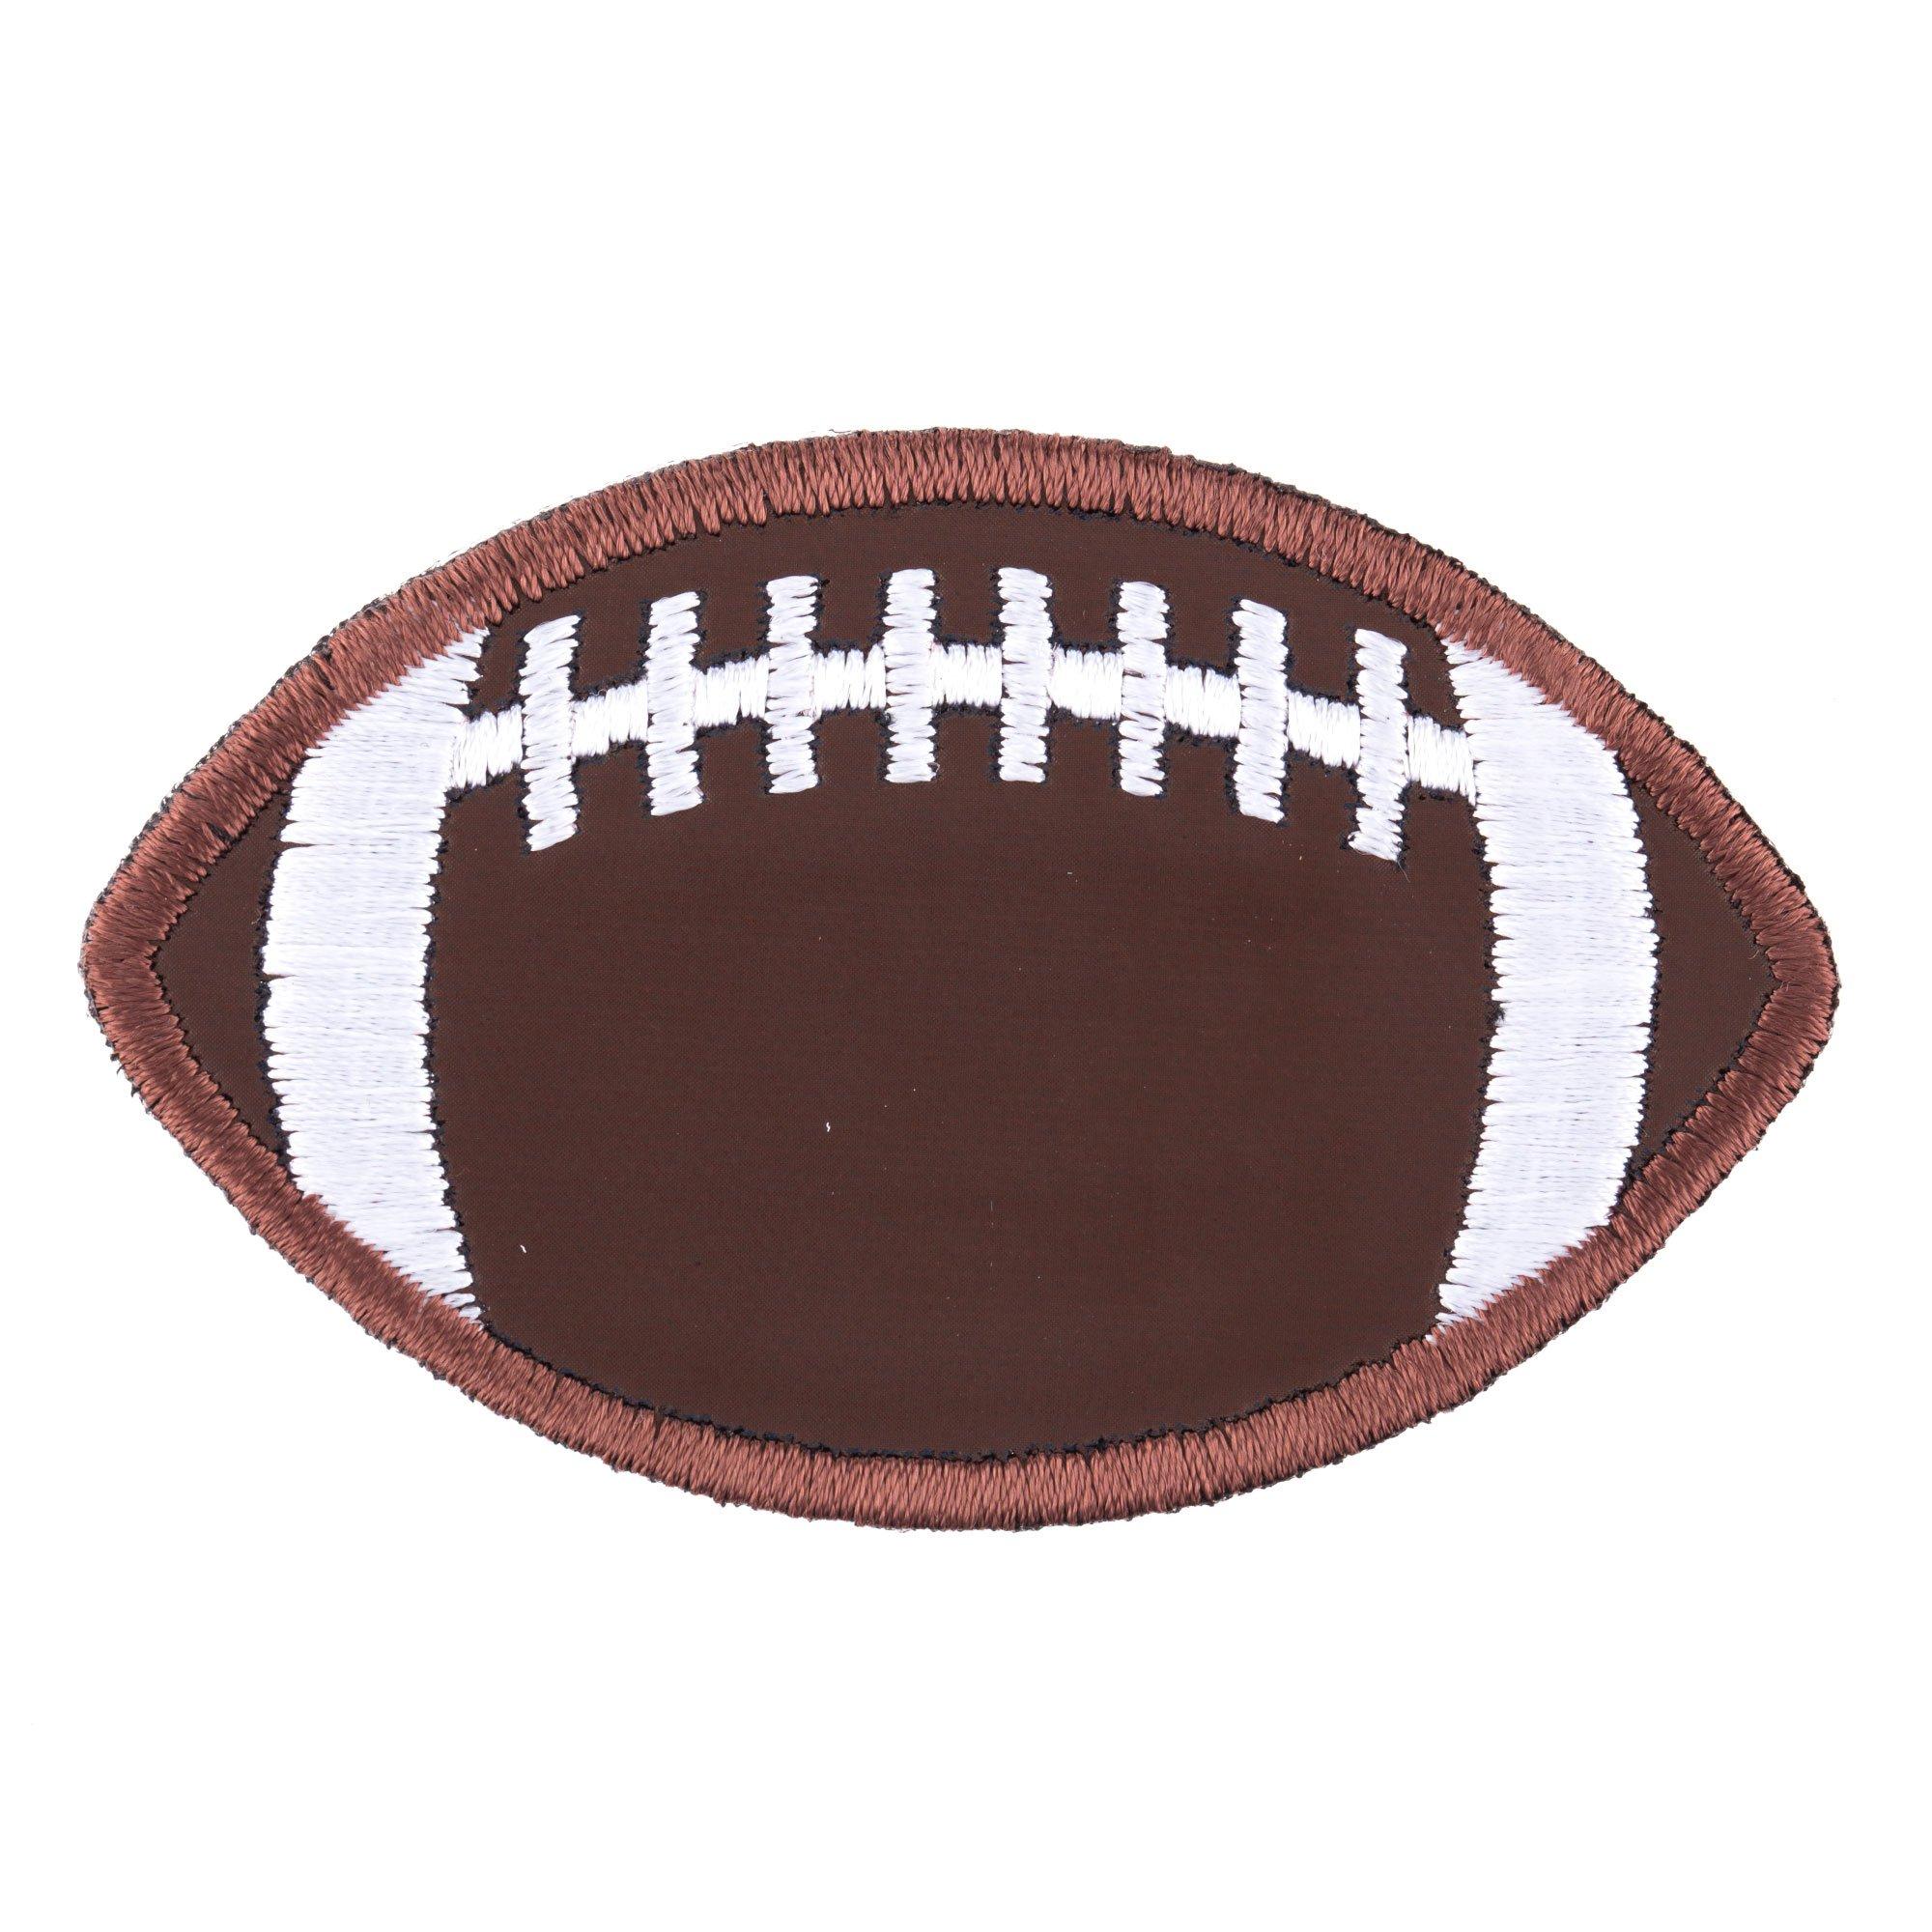 Football Patch American Team Sport Touchdown Score Embroidered Iron on  Applique 